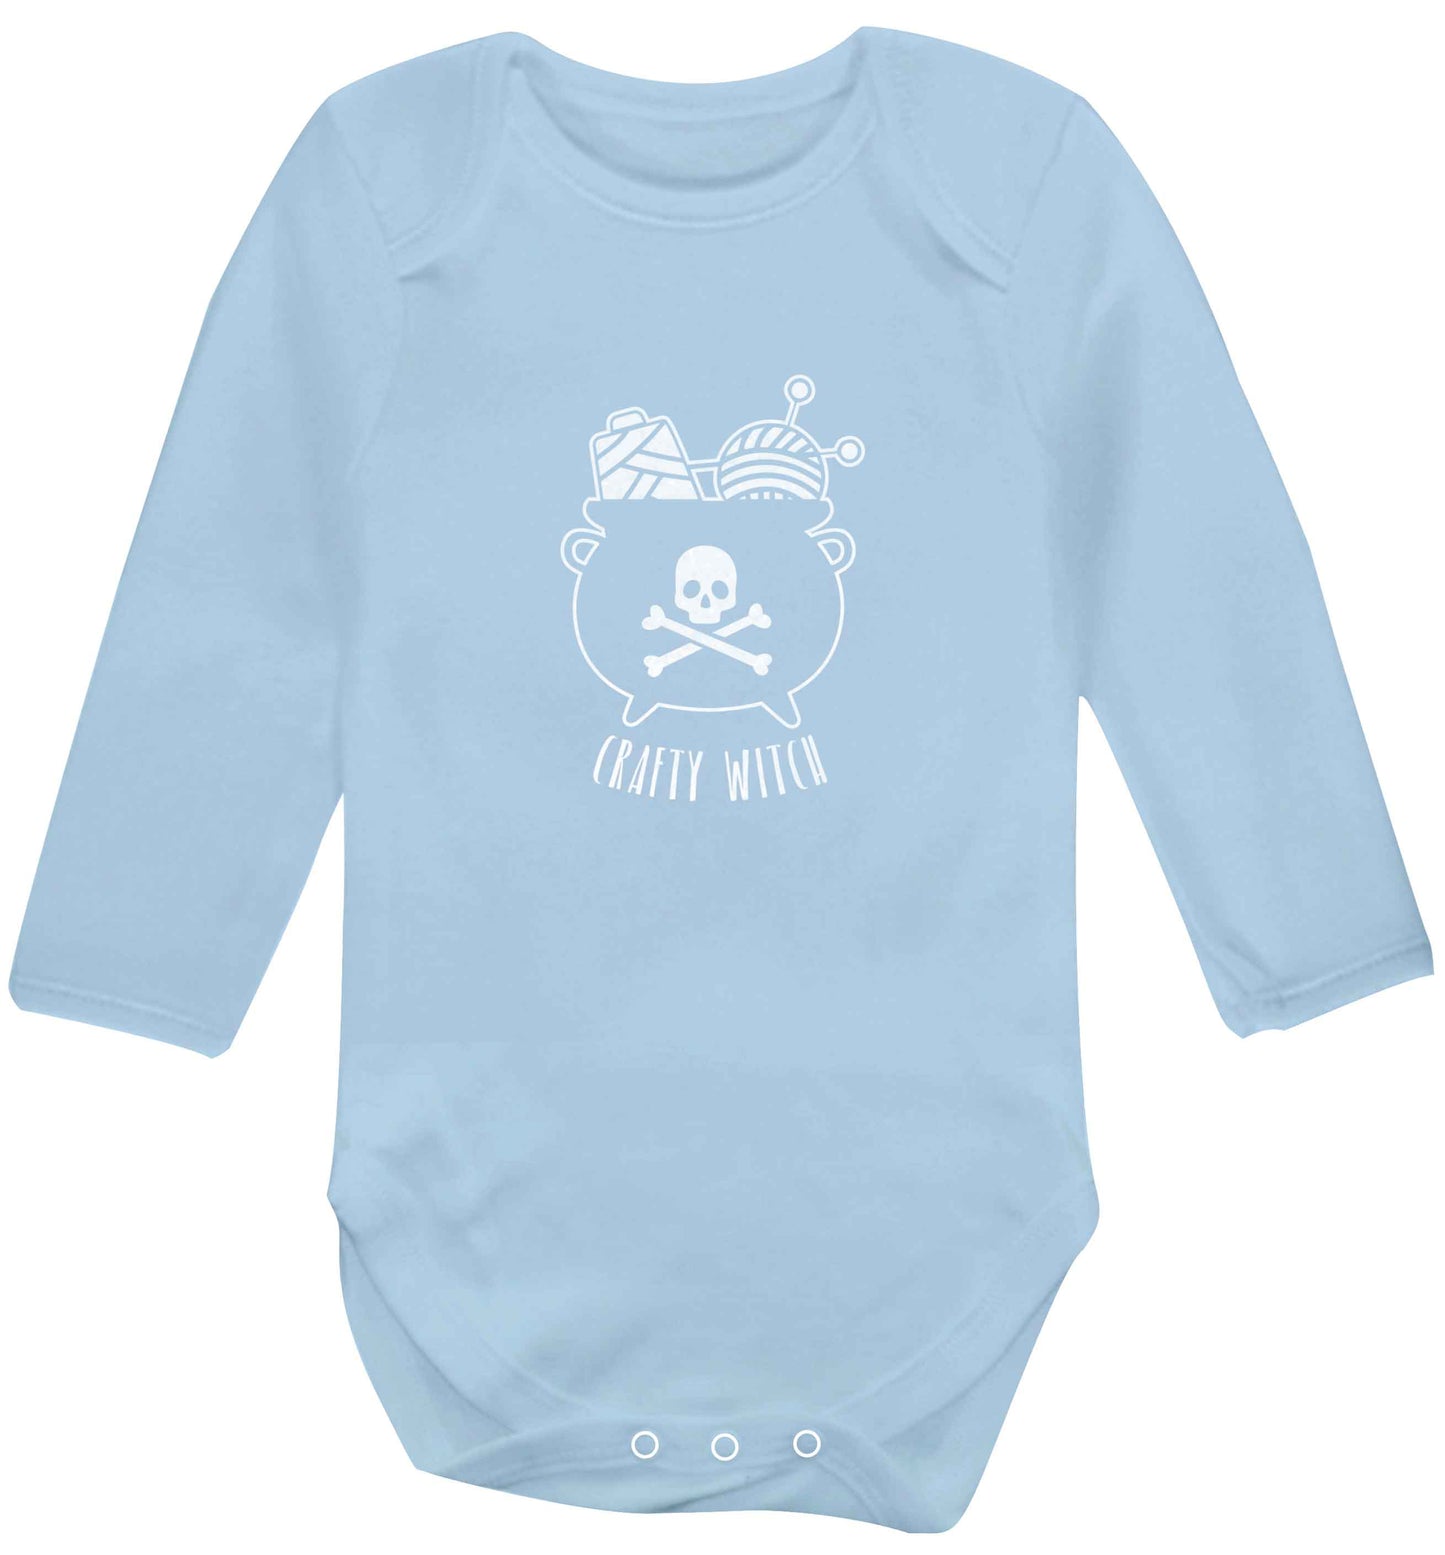 Crafty witch baby vest long sleeved pale blue 6-12 months